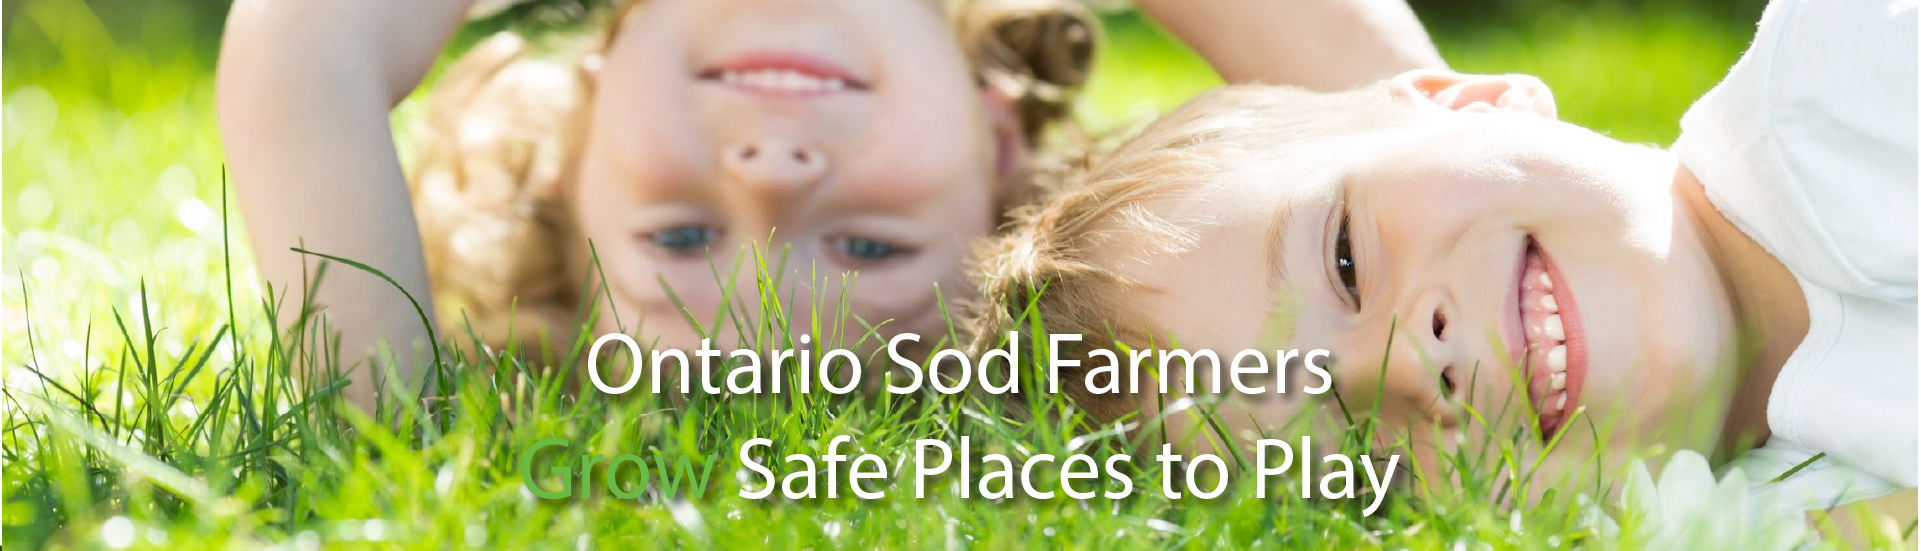 Ontario Sod Farmers Grow Safe Places to Play